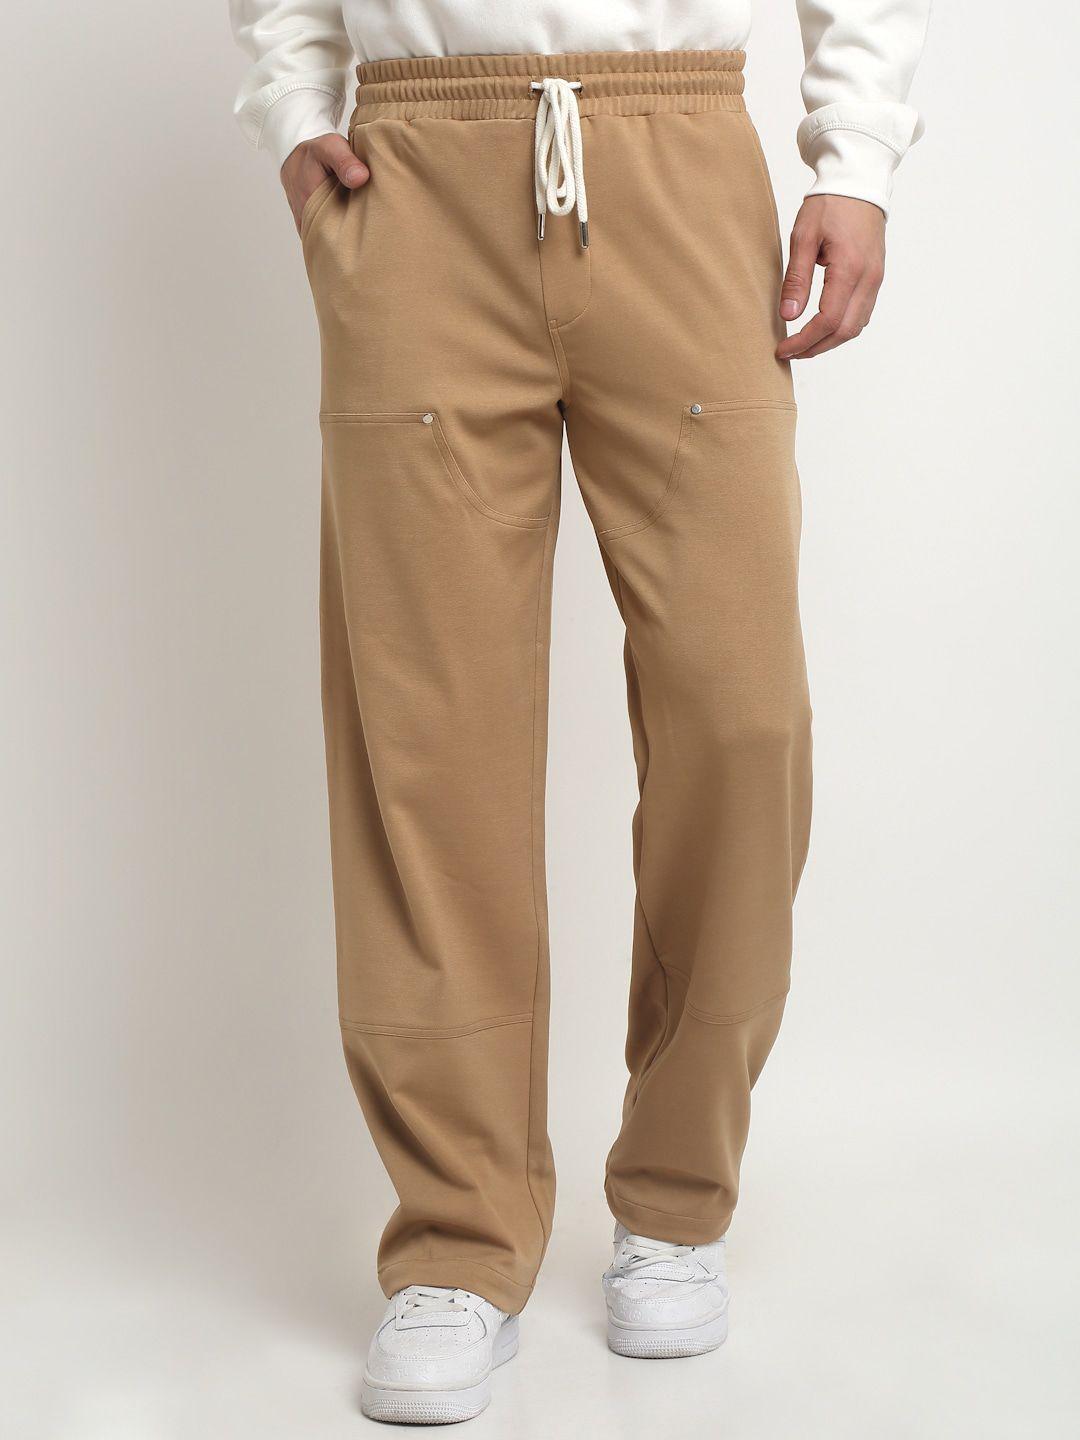 everdion-men-relaxed-straight-leg-straight-fit-easy-wash-parallel-trousers